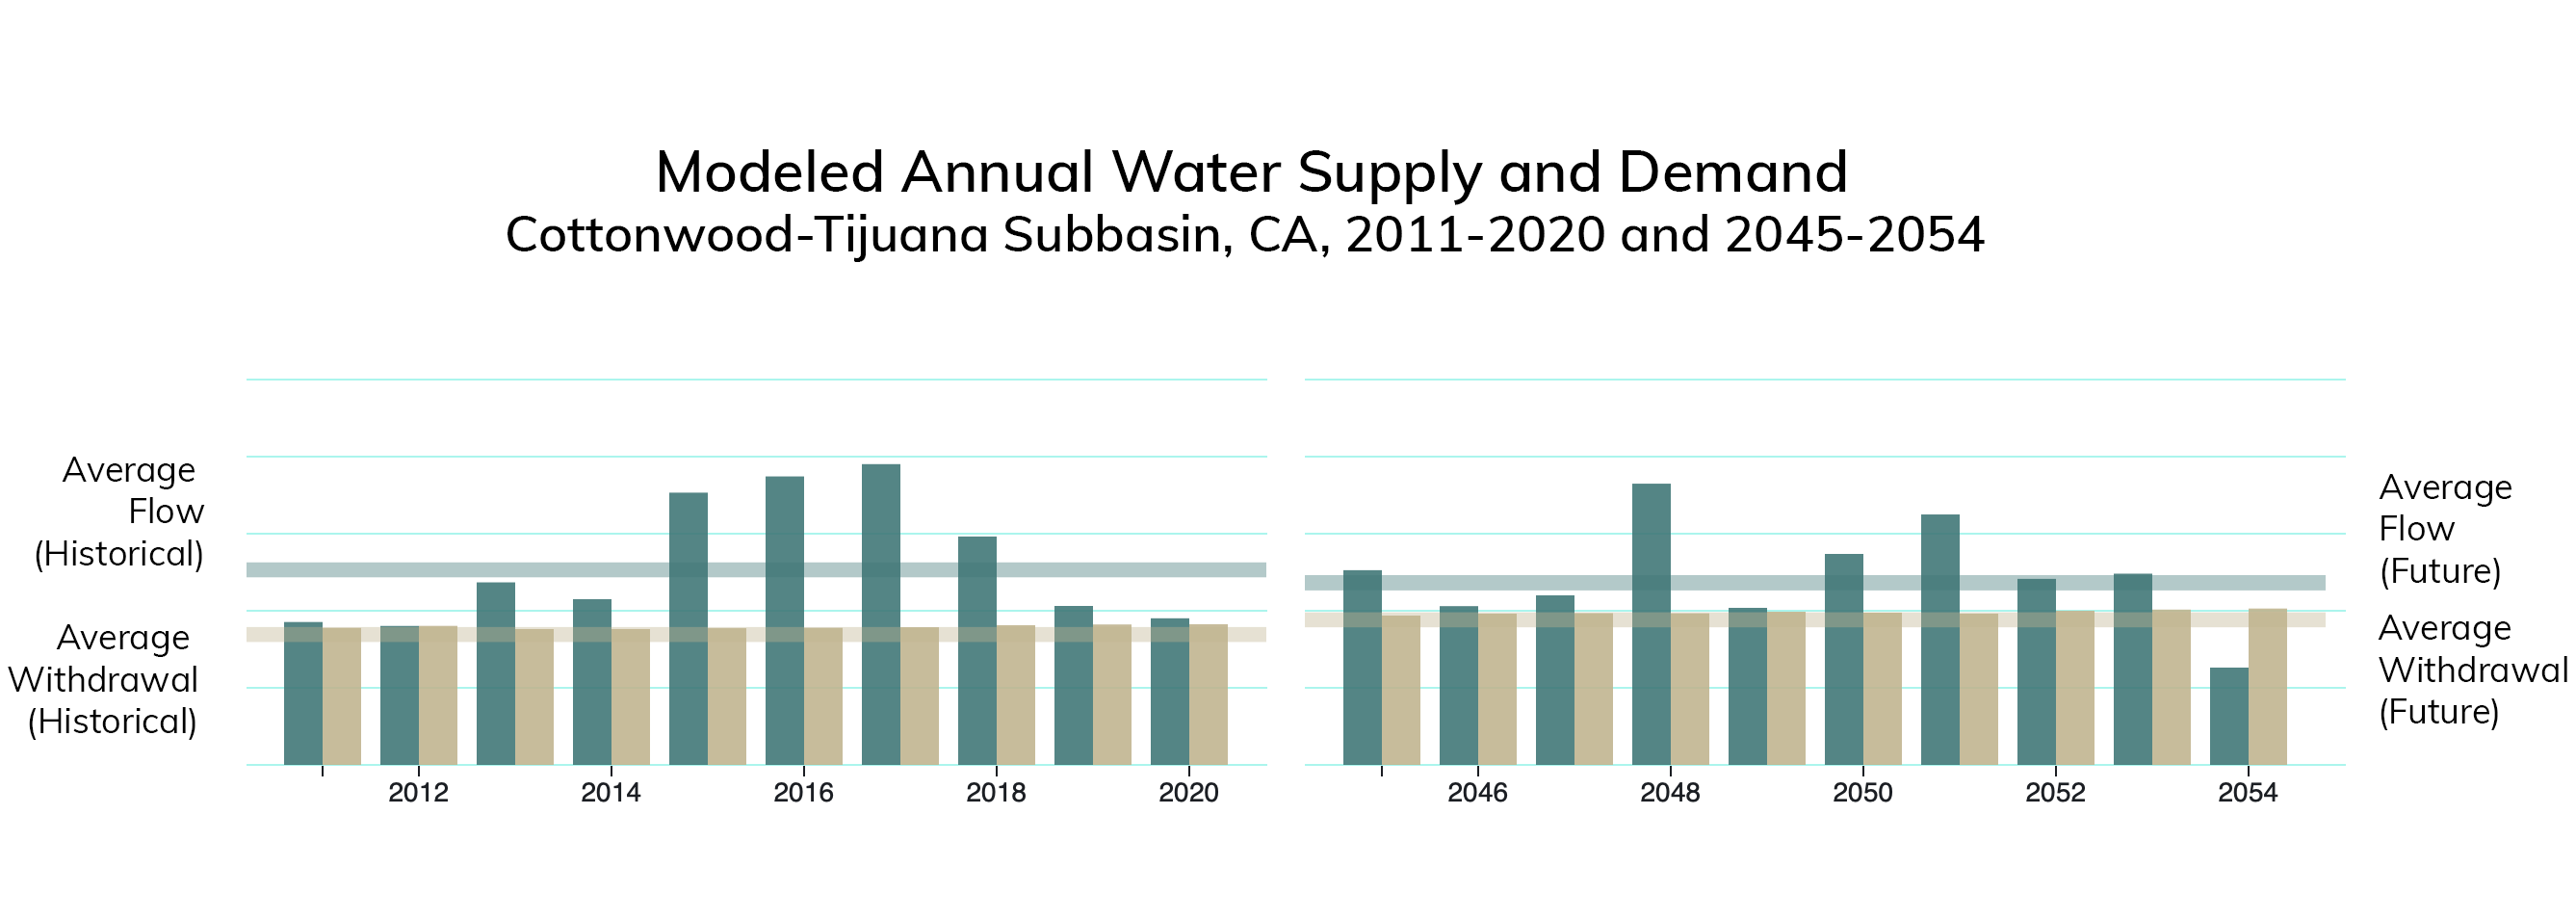 modeled annual water supply and demand for the Cottonwood-Tijuana Subbasin, CA, 2011-2020 and 2045-2054